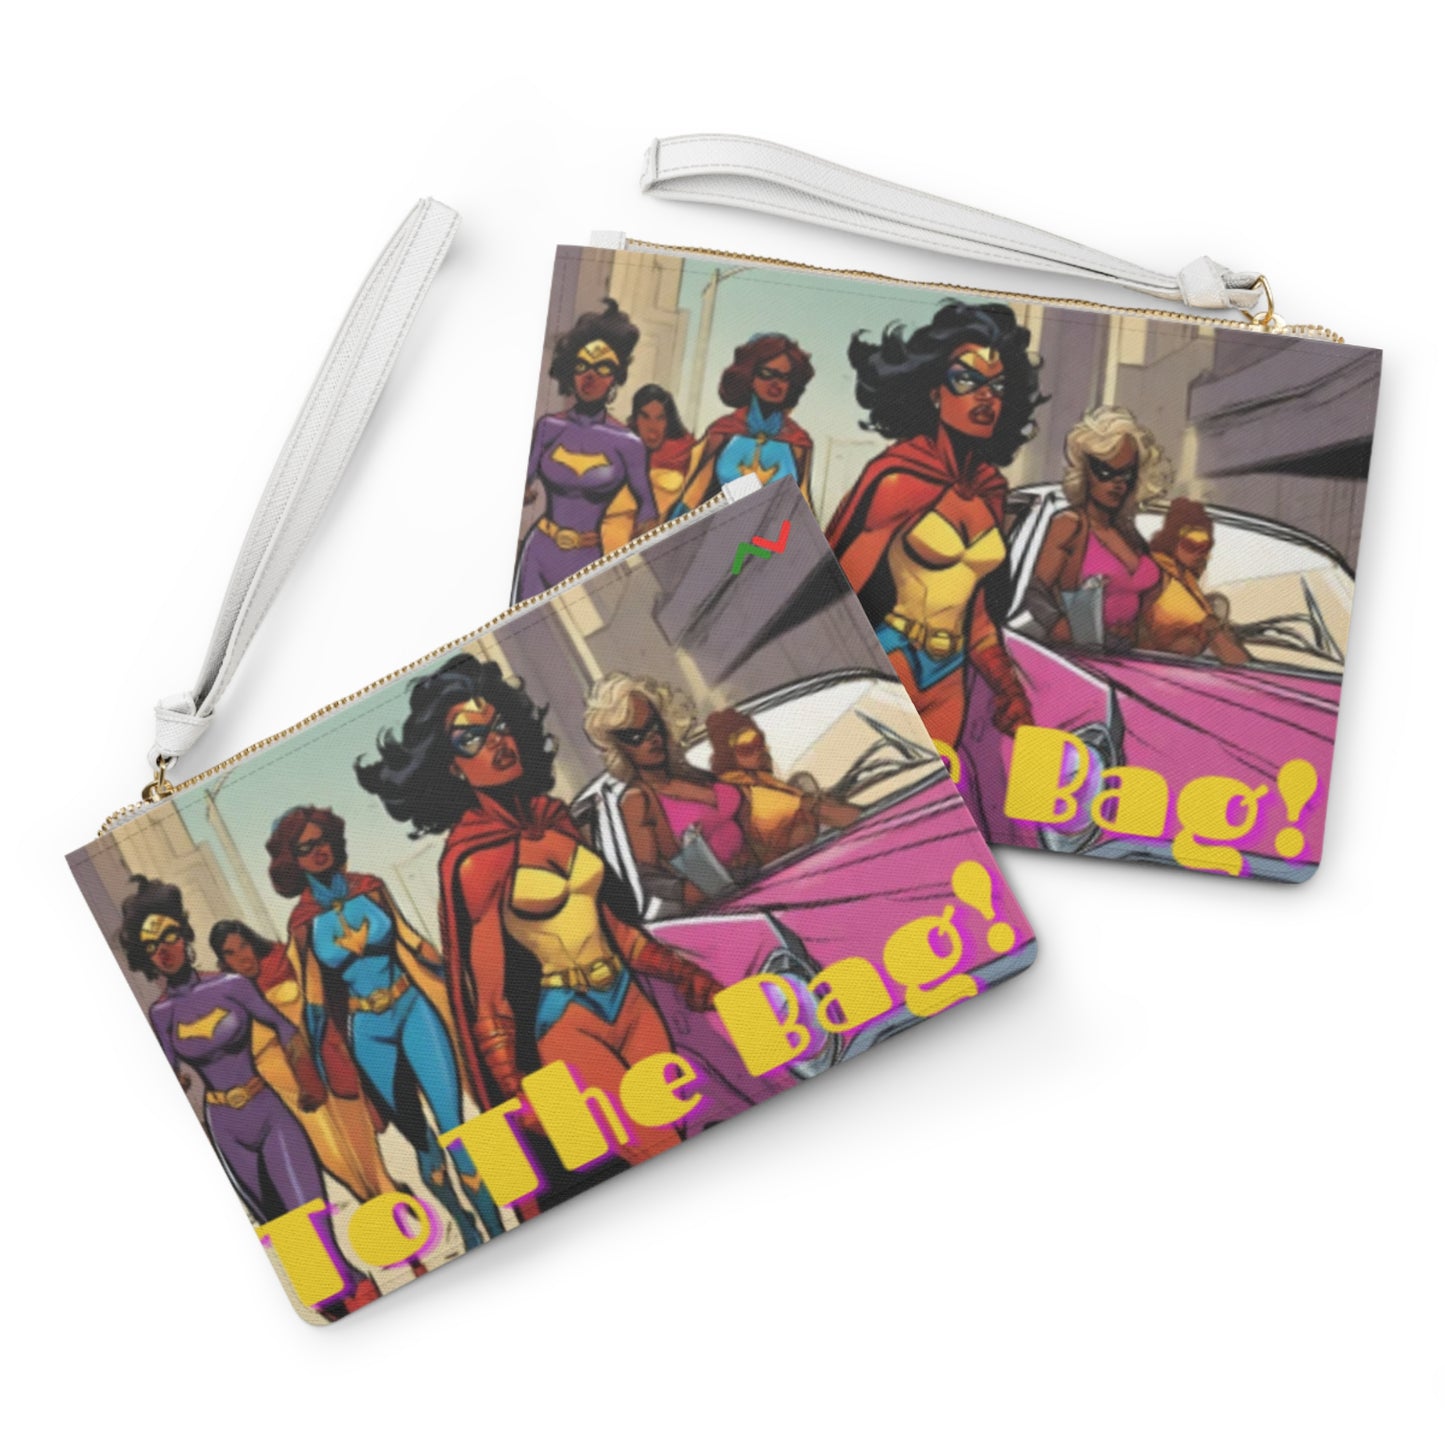 “To The Bag!”: Issue 3 Clutch